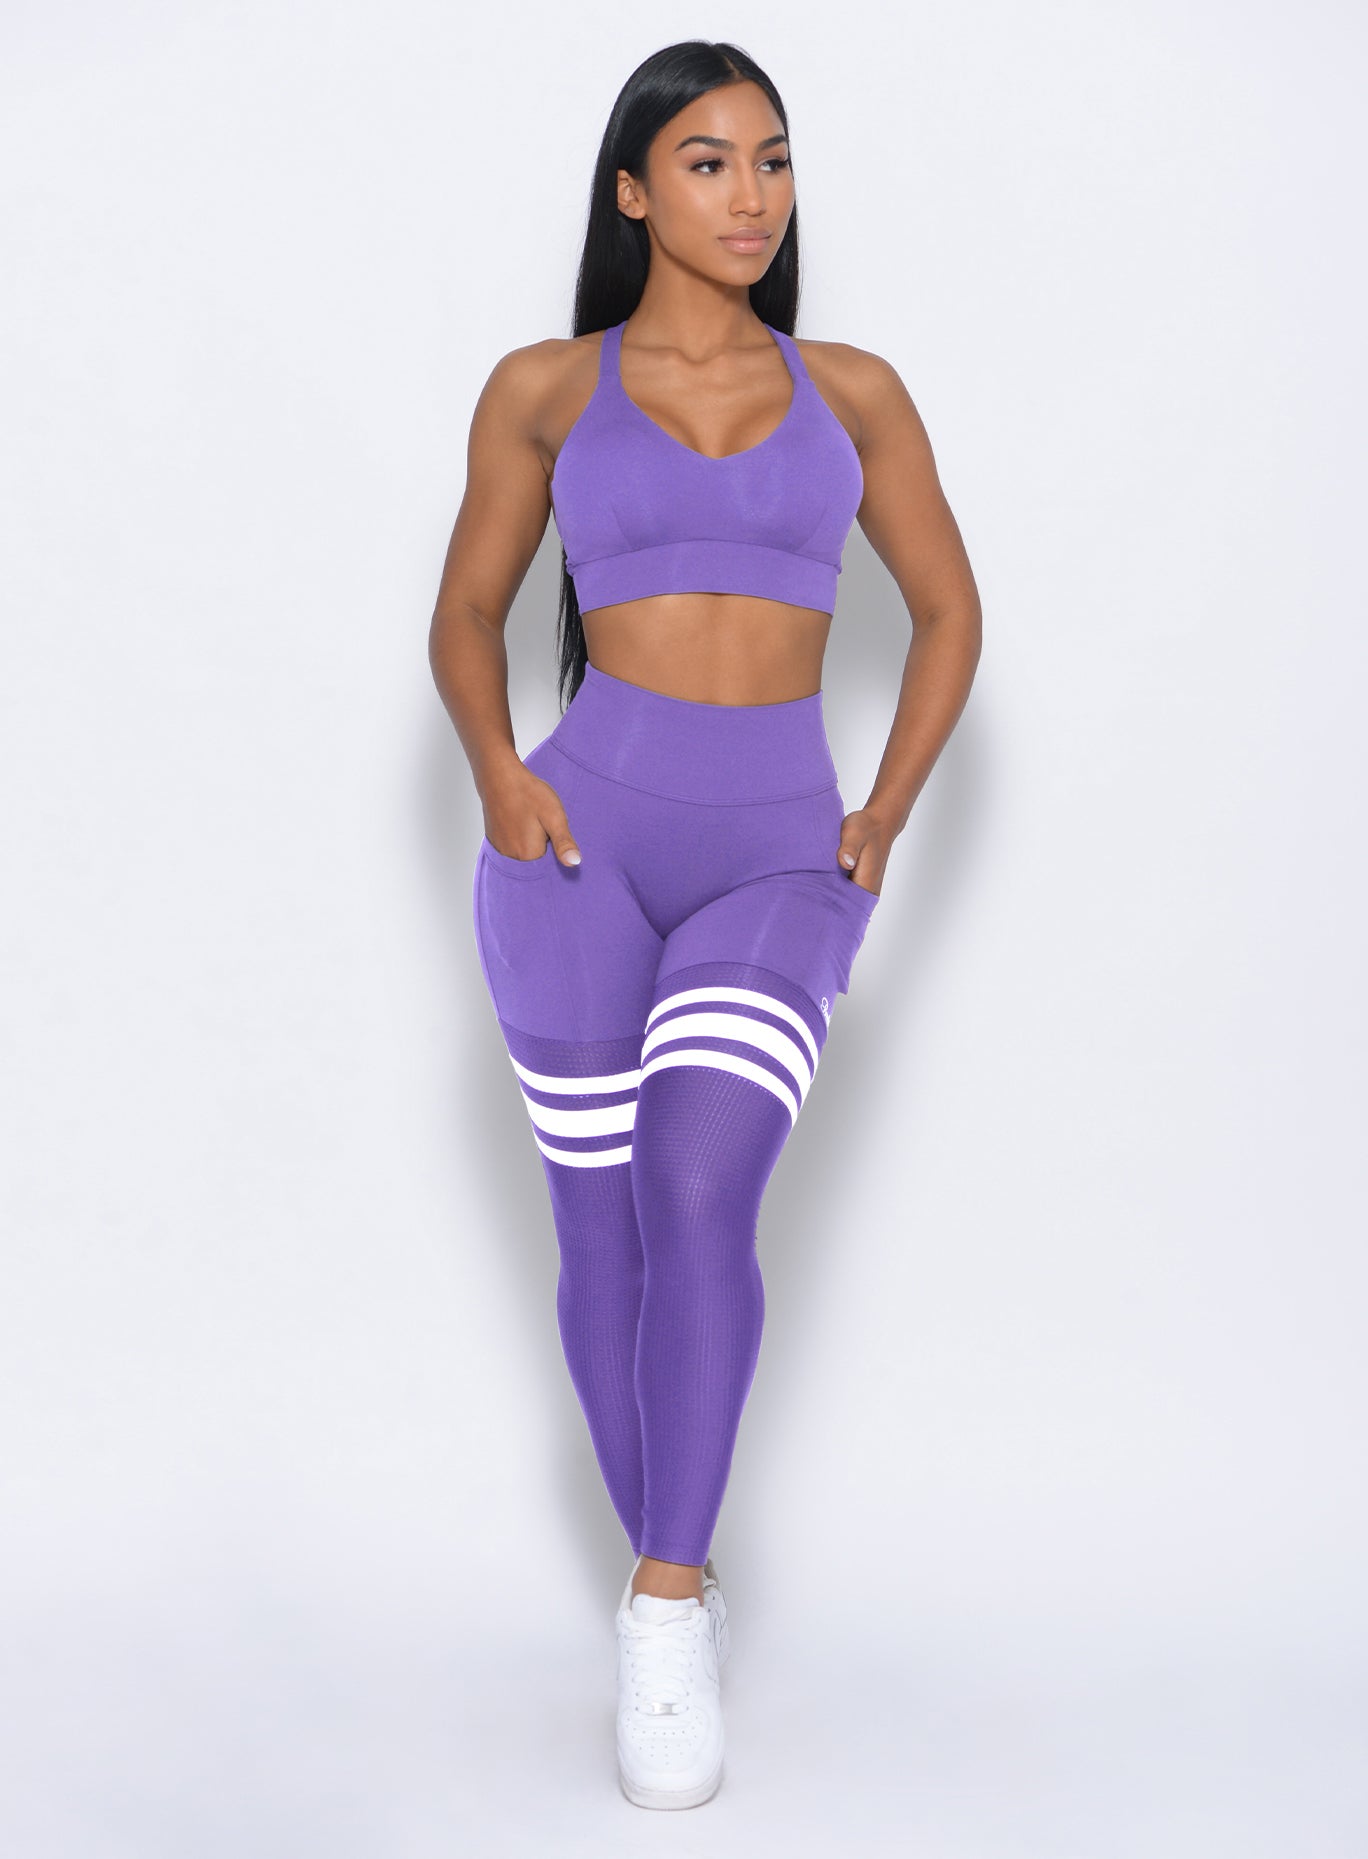 Front profile view of the model in our perform thigh highs in royal purple color and a matching bra